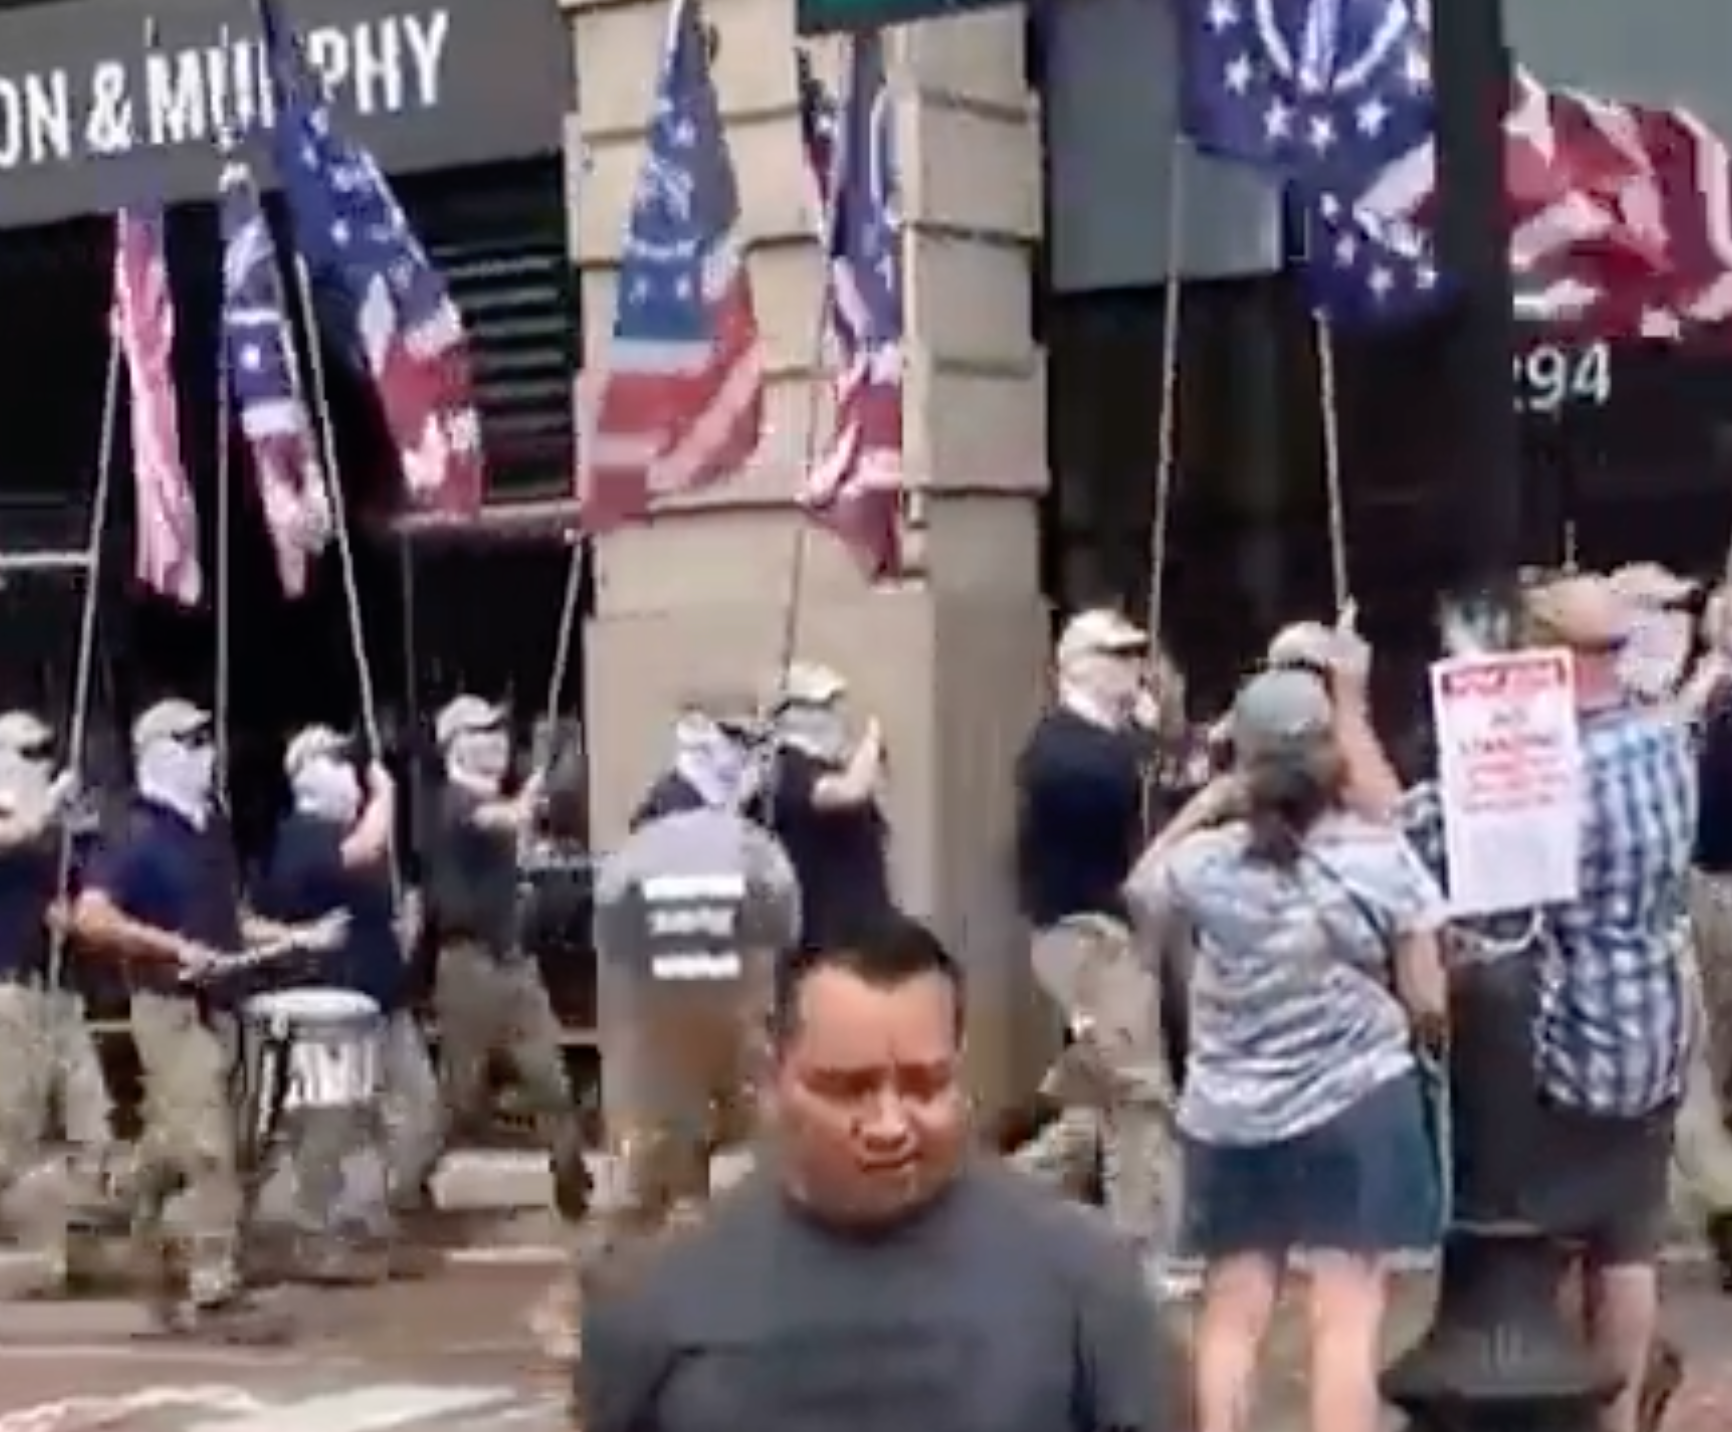 Right-wing extremist group Patriot Front marches through Boston carrying flags. Members of the group have been accused of assaulting a Black man who was trying to film them during their march.